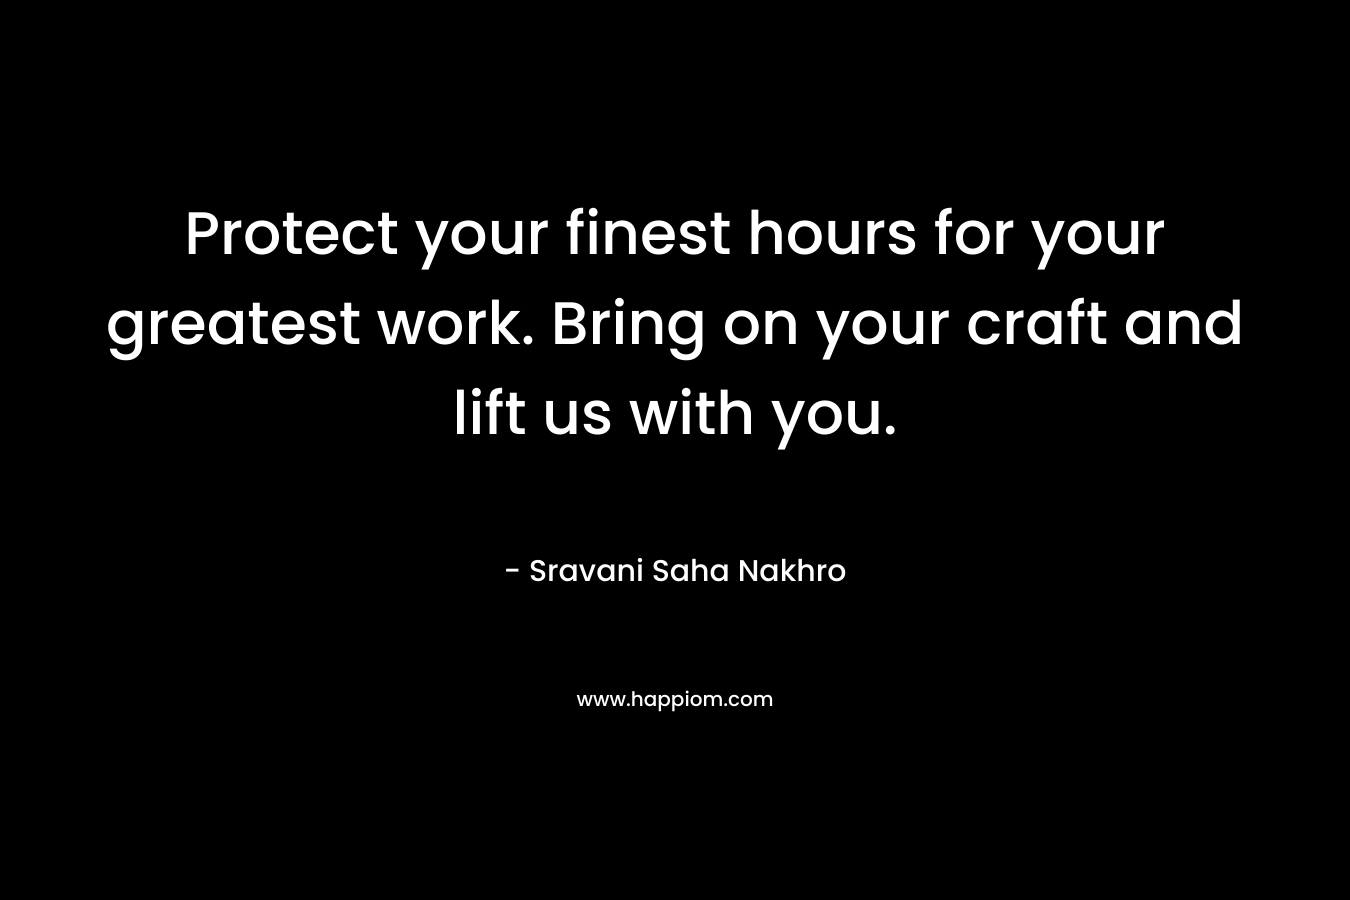 Protect your finest hours for your greatest work. Bring on your craft and lift us with you.